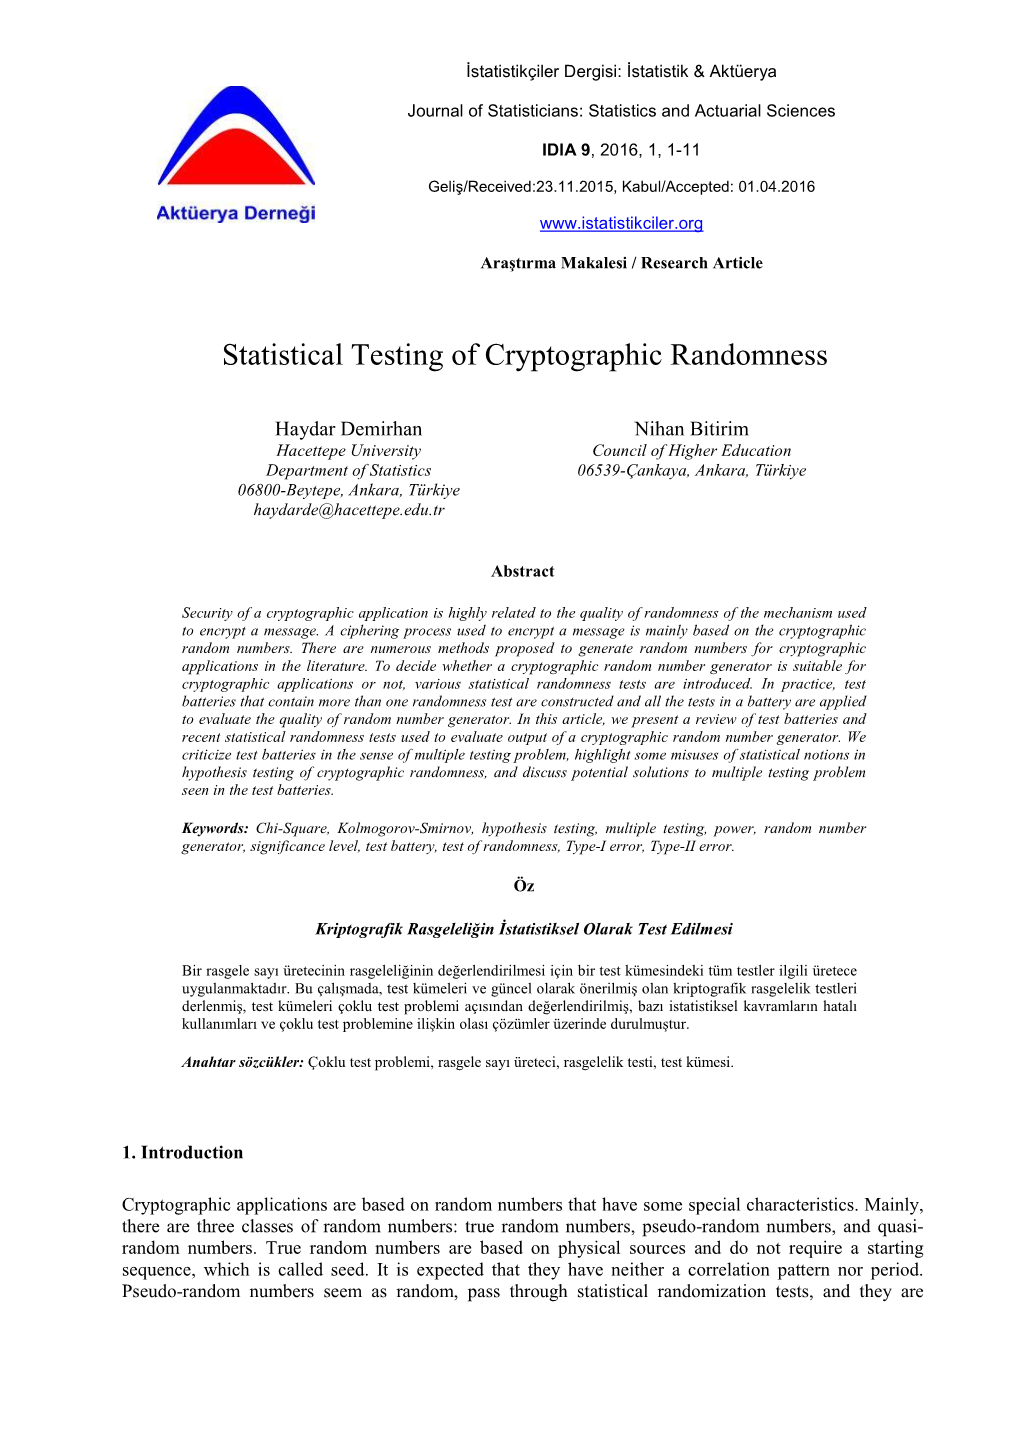 Statistical Testing of Cryptographic Randomness